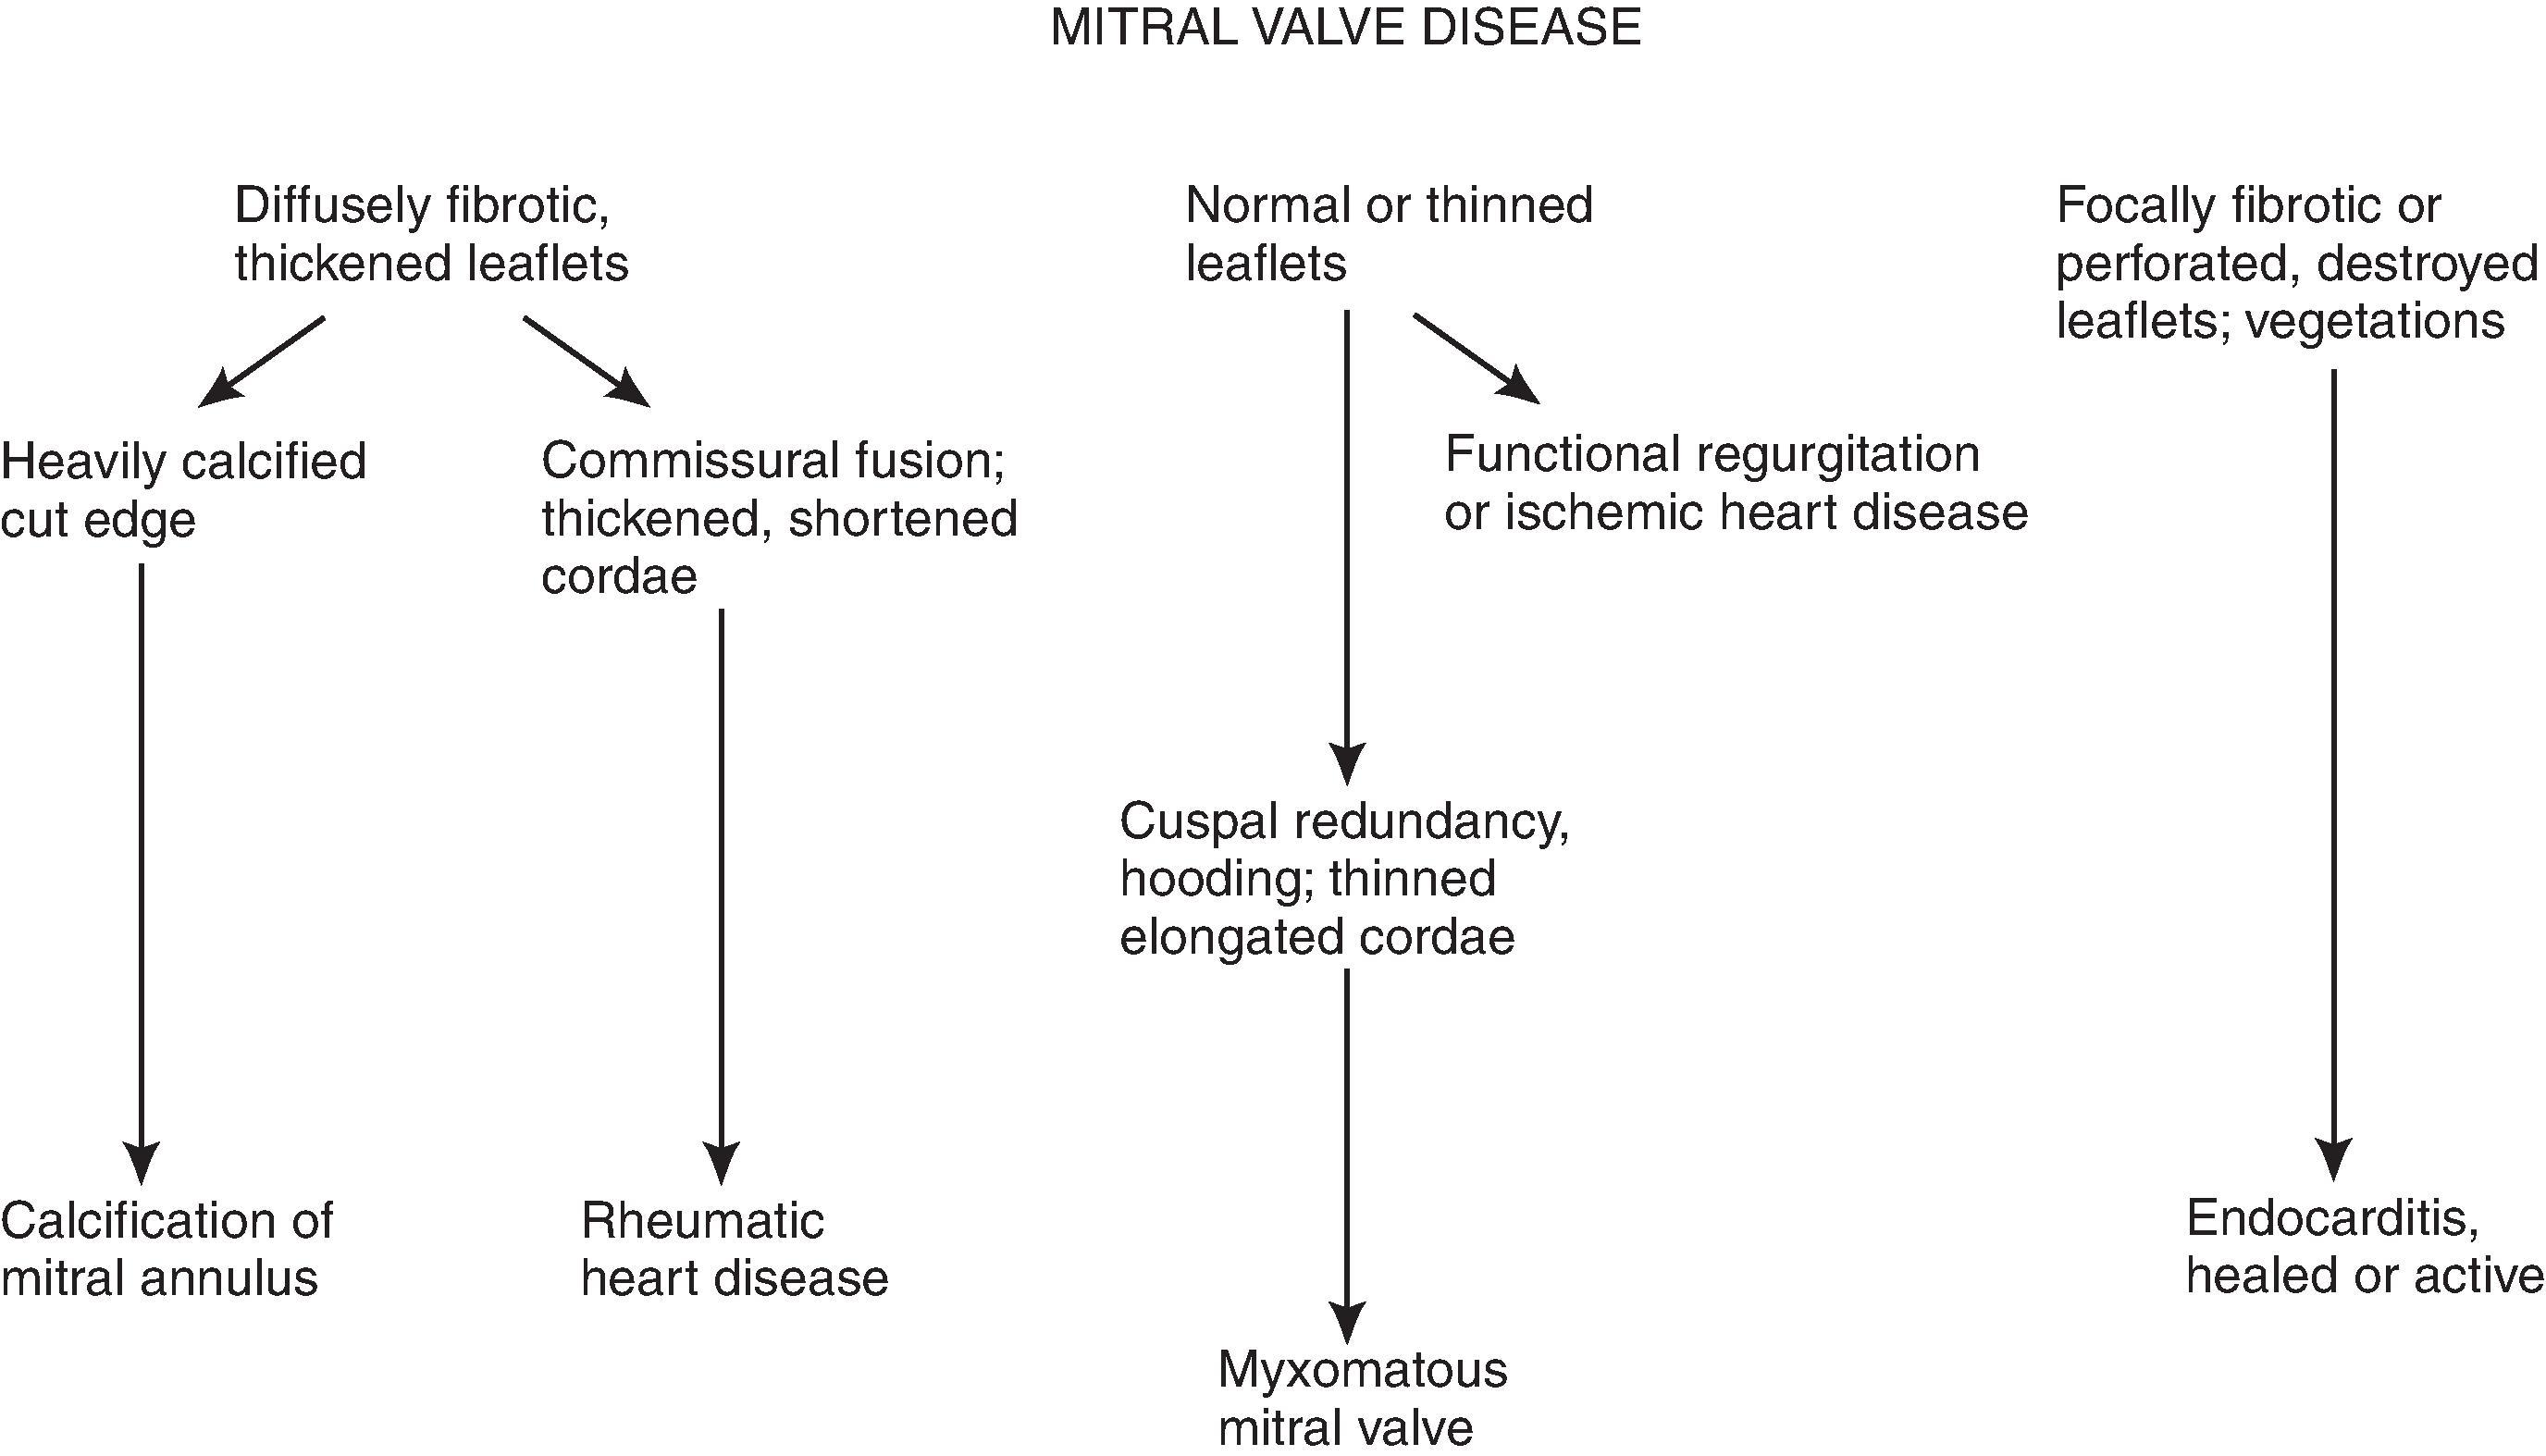 Figure 13.3, Overview of major diagnostic considerations in mitral valve disease. (From Schoen FJ. Evaluation of surgically removed natural and prosthetic heart valves. In: Virmani R, Fenoglio JJ, eds. Cardiovascular Pathology. Philadelphia: W.B. Saunders; 1991:404.)